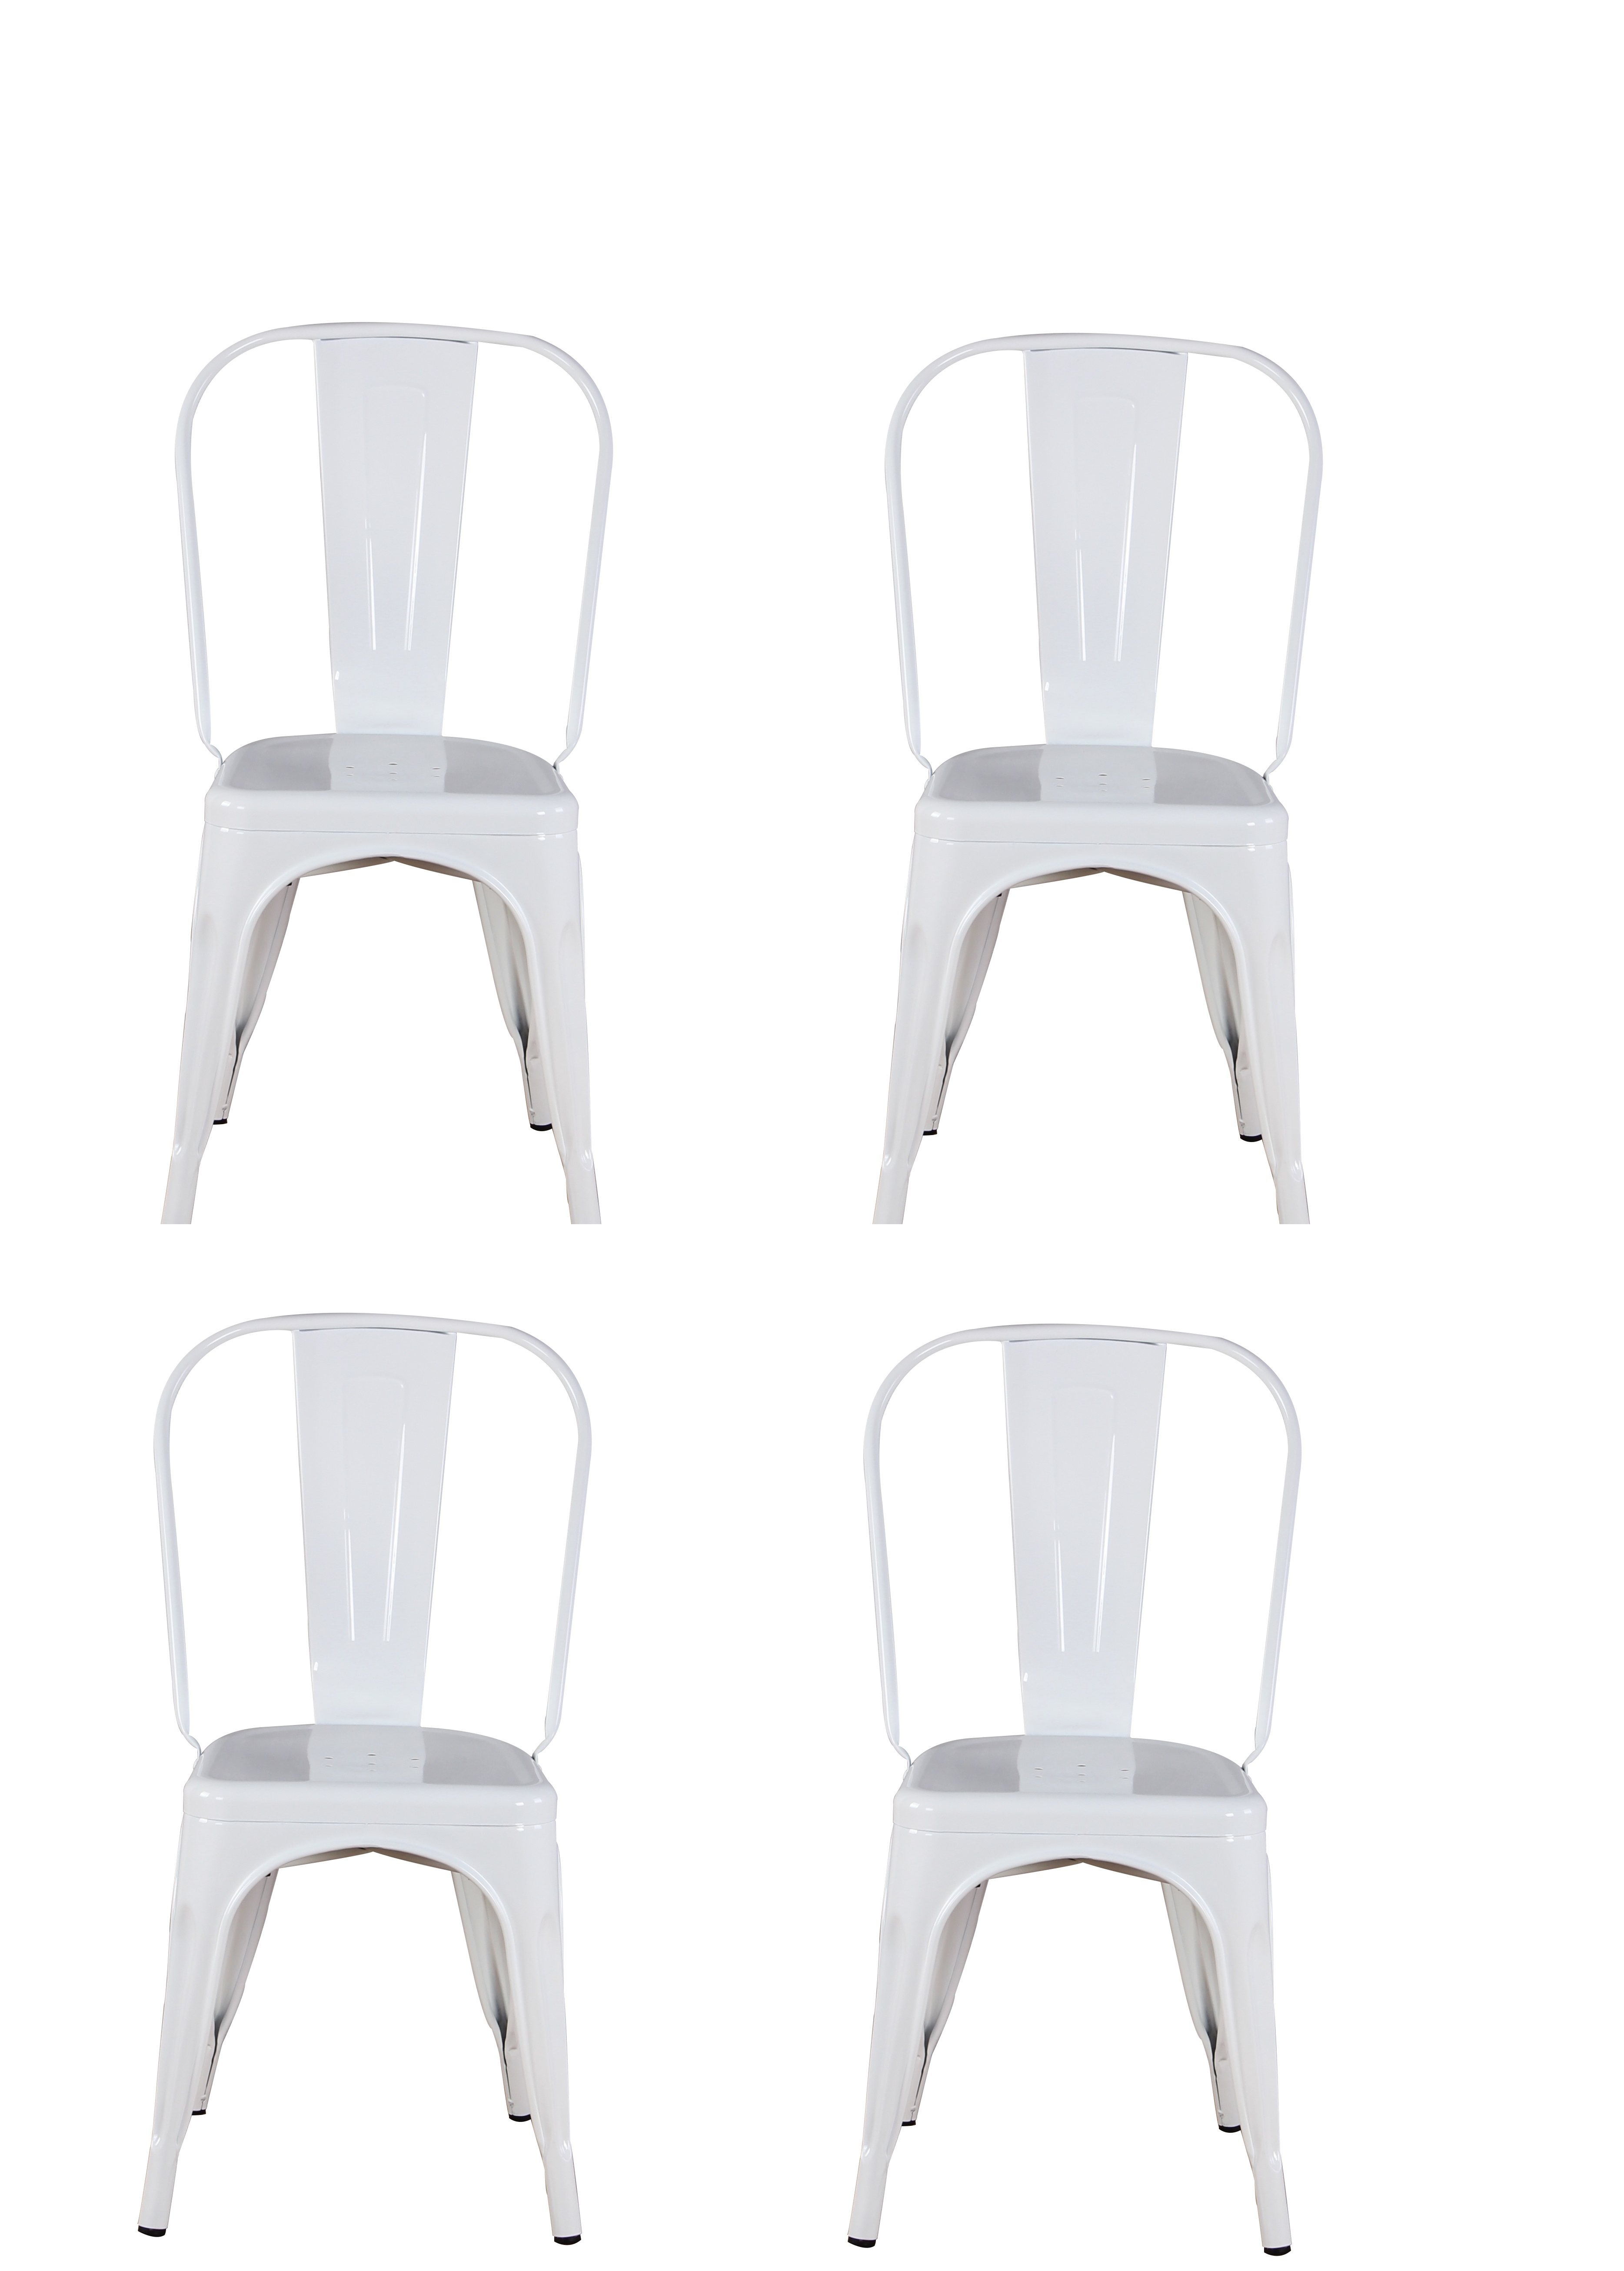 A set of 4 metal dining chairs, industrial style chairs, stackable,used for restaurant terrace outdoor furniture (white/black)